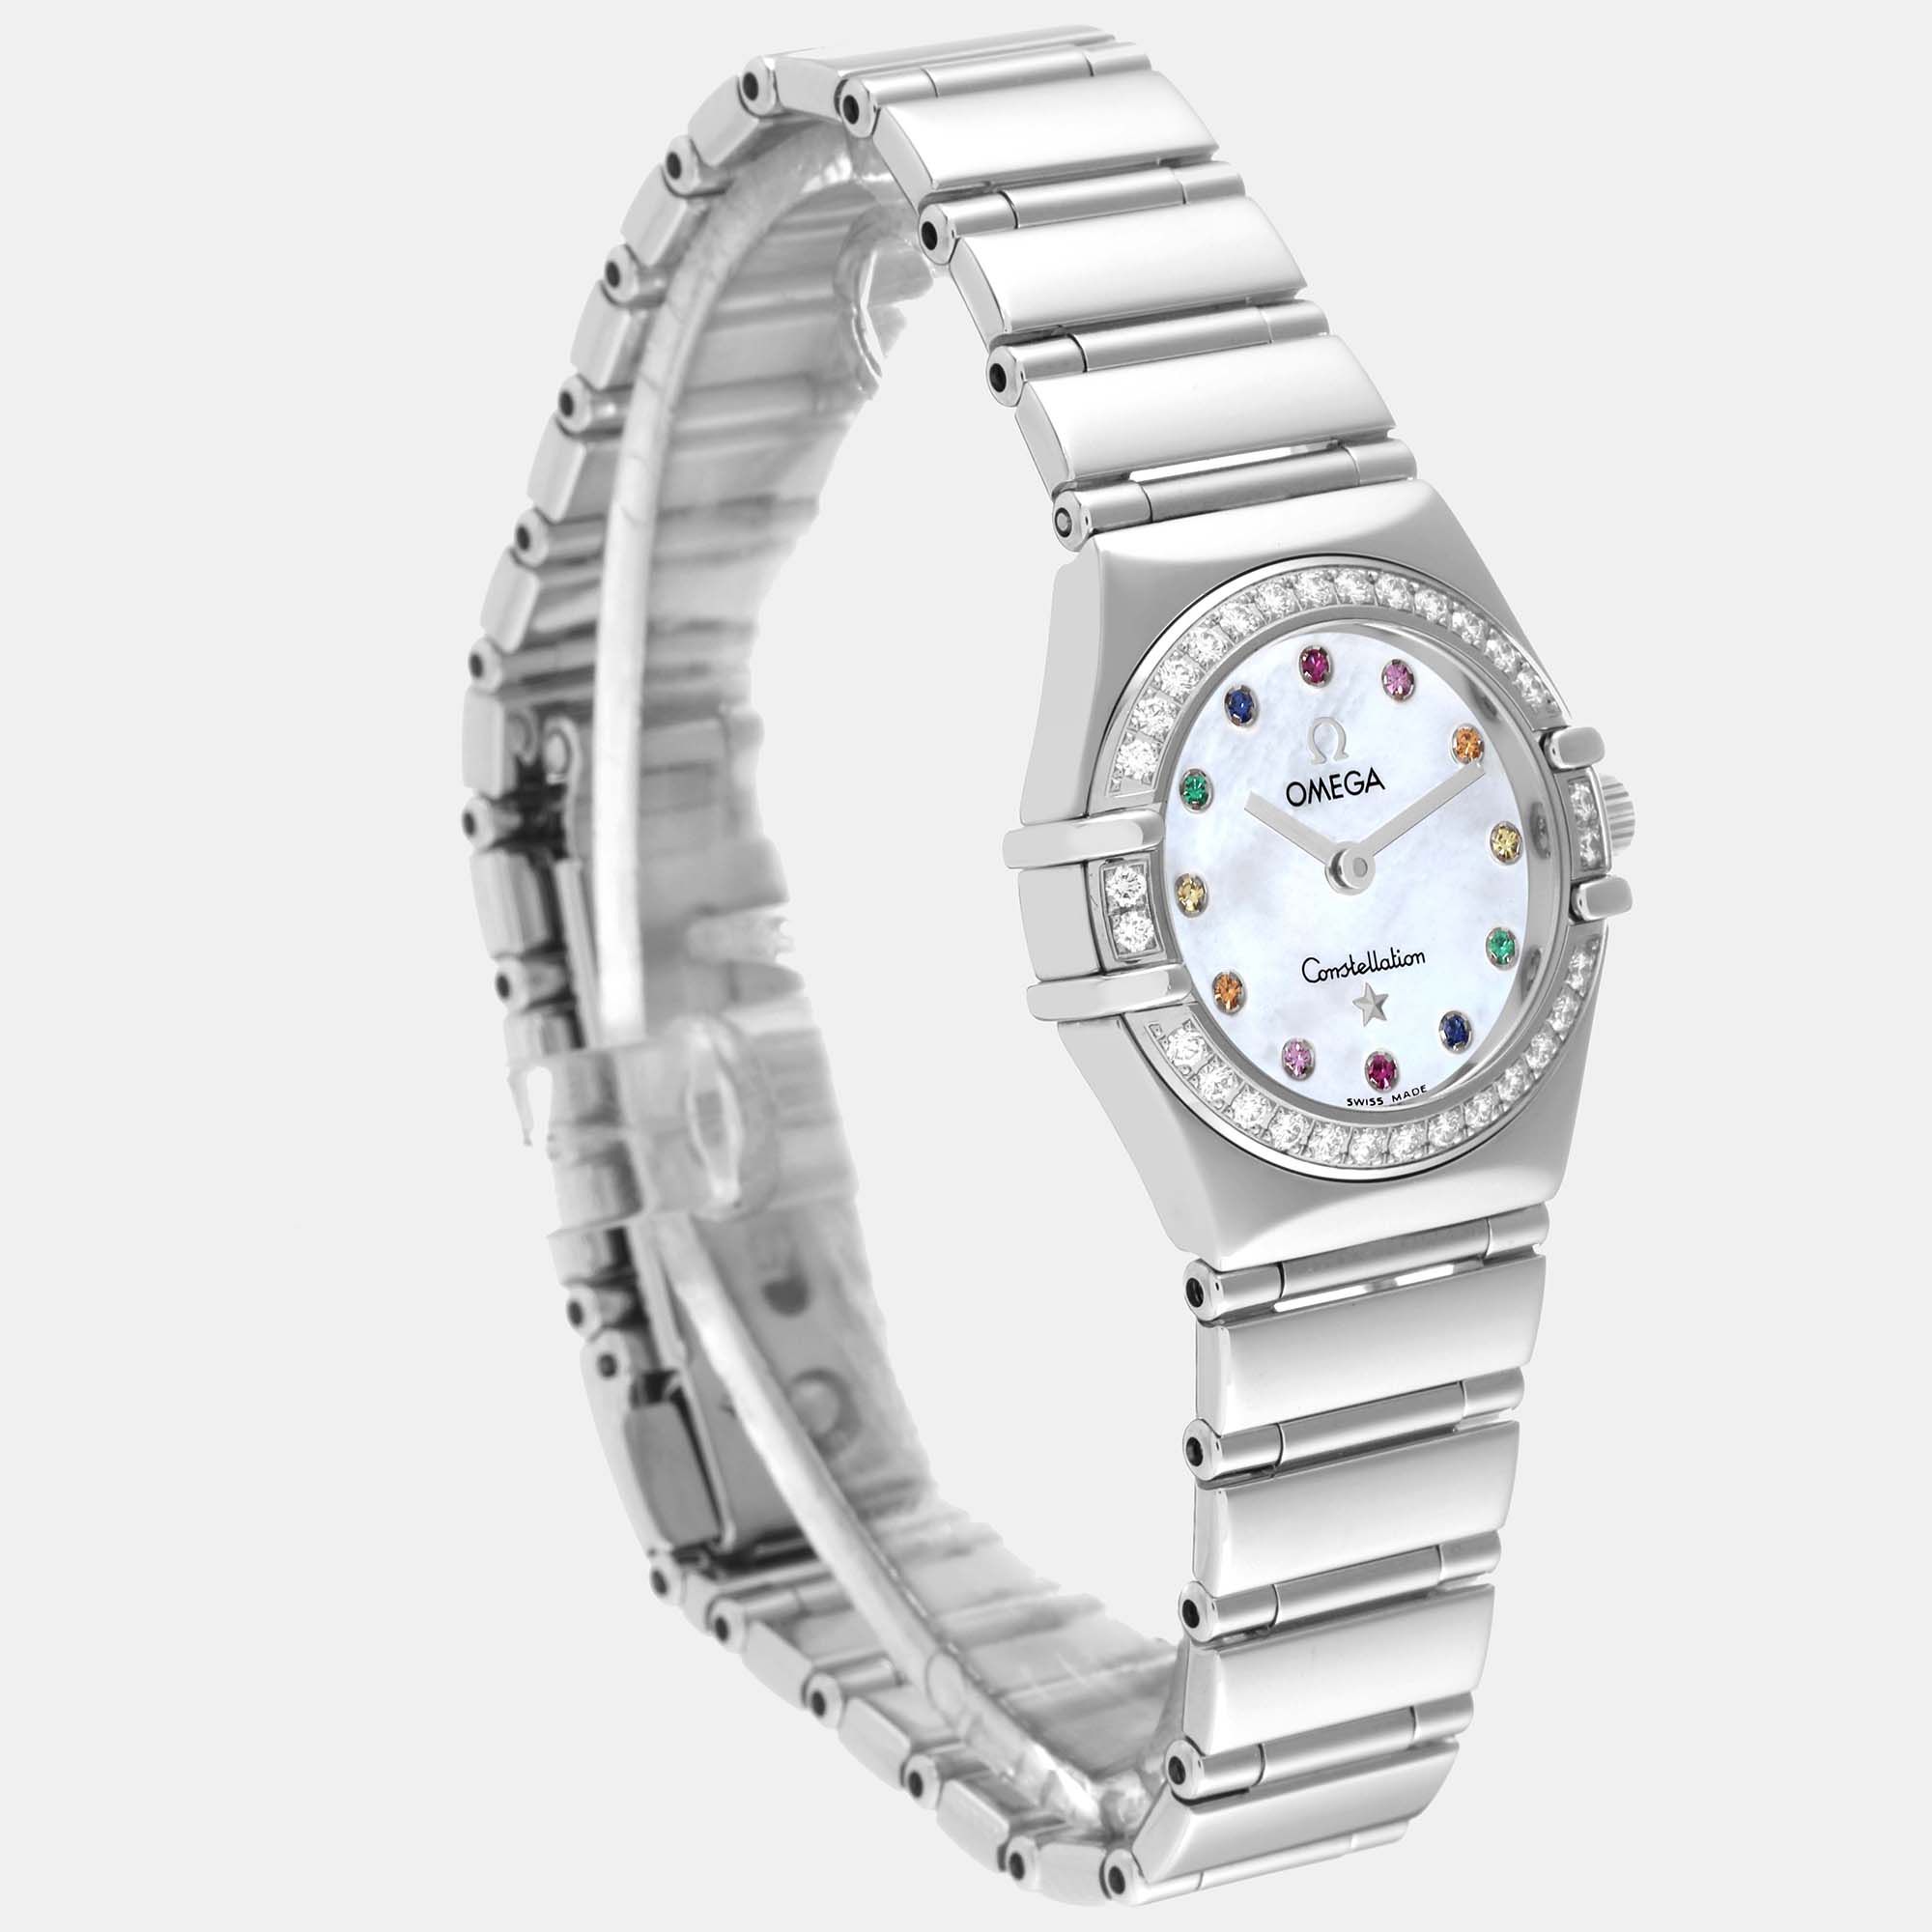 Omega Mother Of Pearl Diamond Stainless Steel Constellation 1460.79.00 Quartz Women's Wristwatch 22.5 Mm